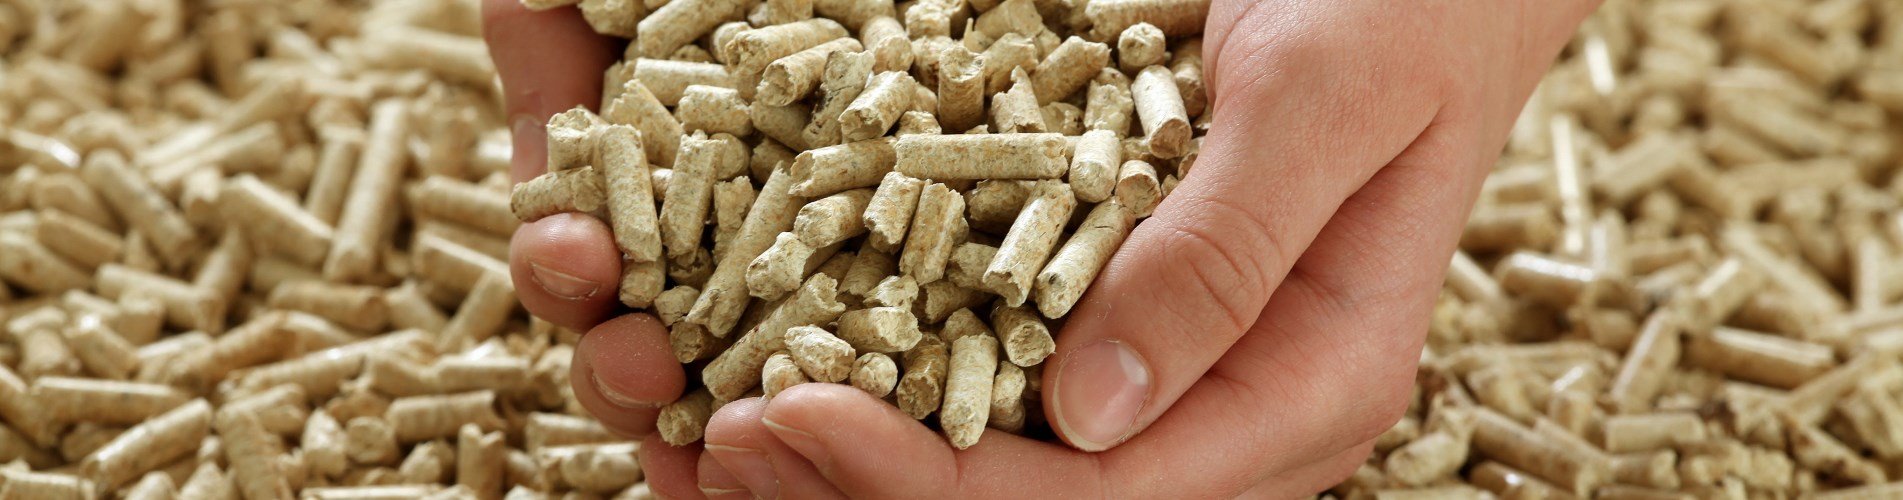 Specifications, certifications and quality standards of biomass pellets